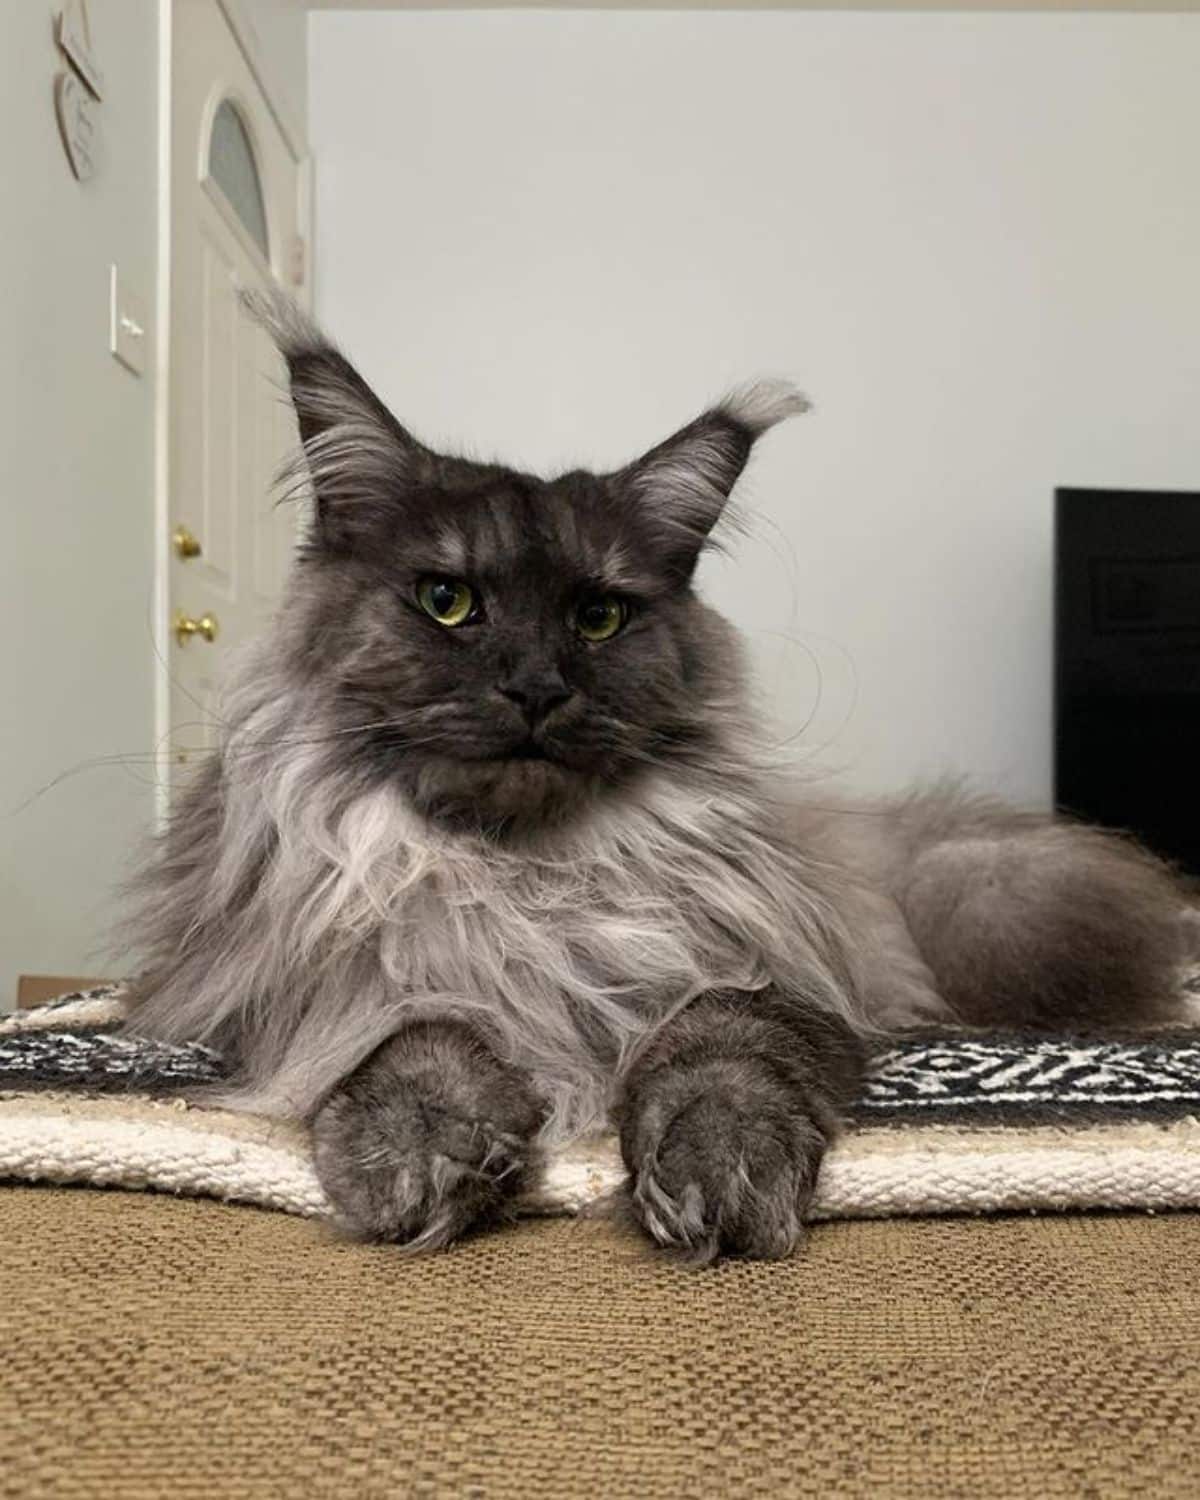 A fluffy gray maine coon lying on a capet.